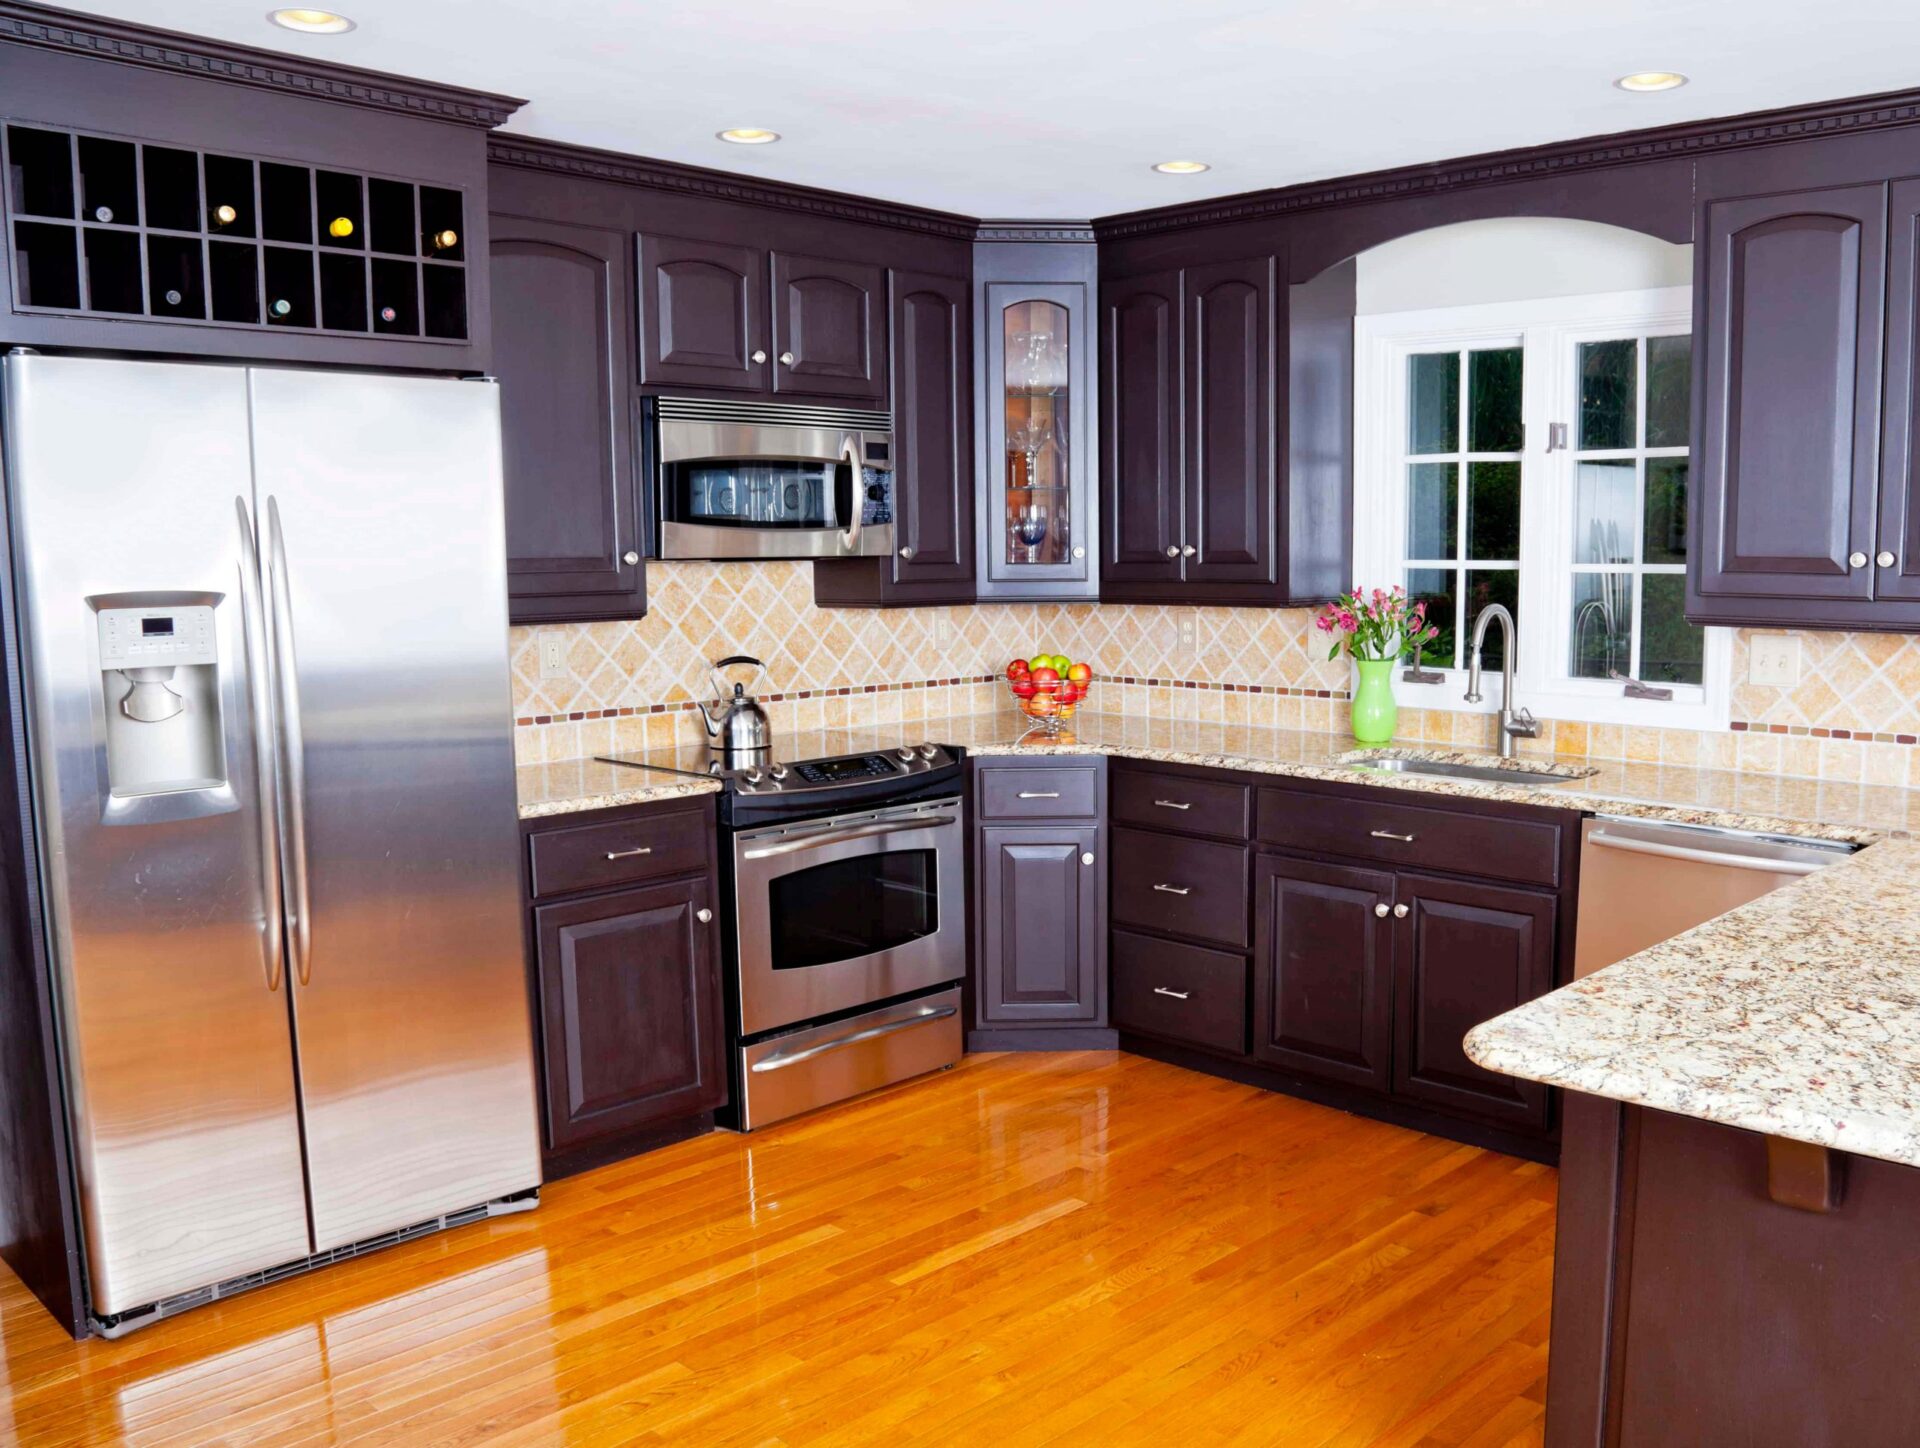 6 Key Areas You Can Update To Increase The Value Of Your Kitchen